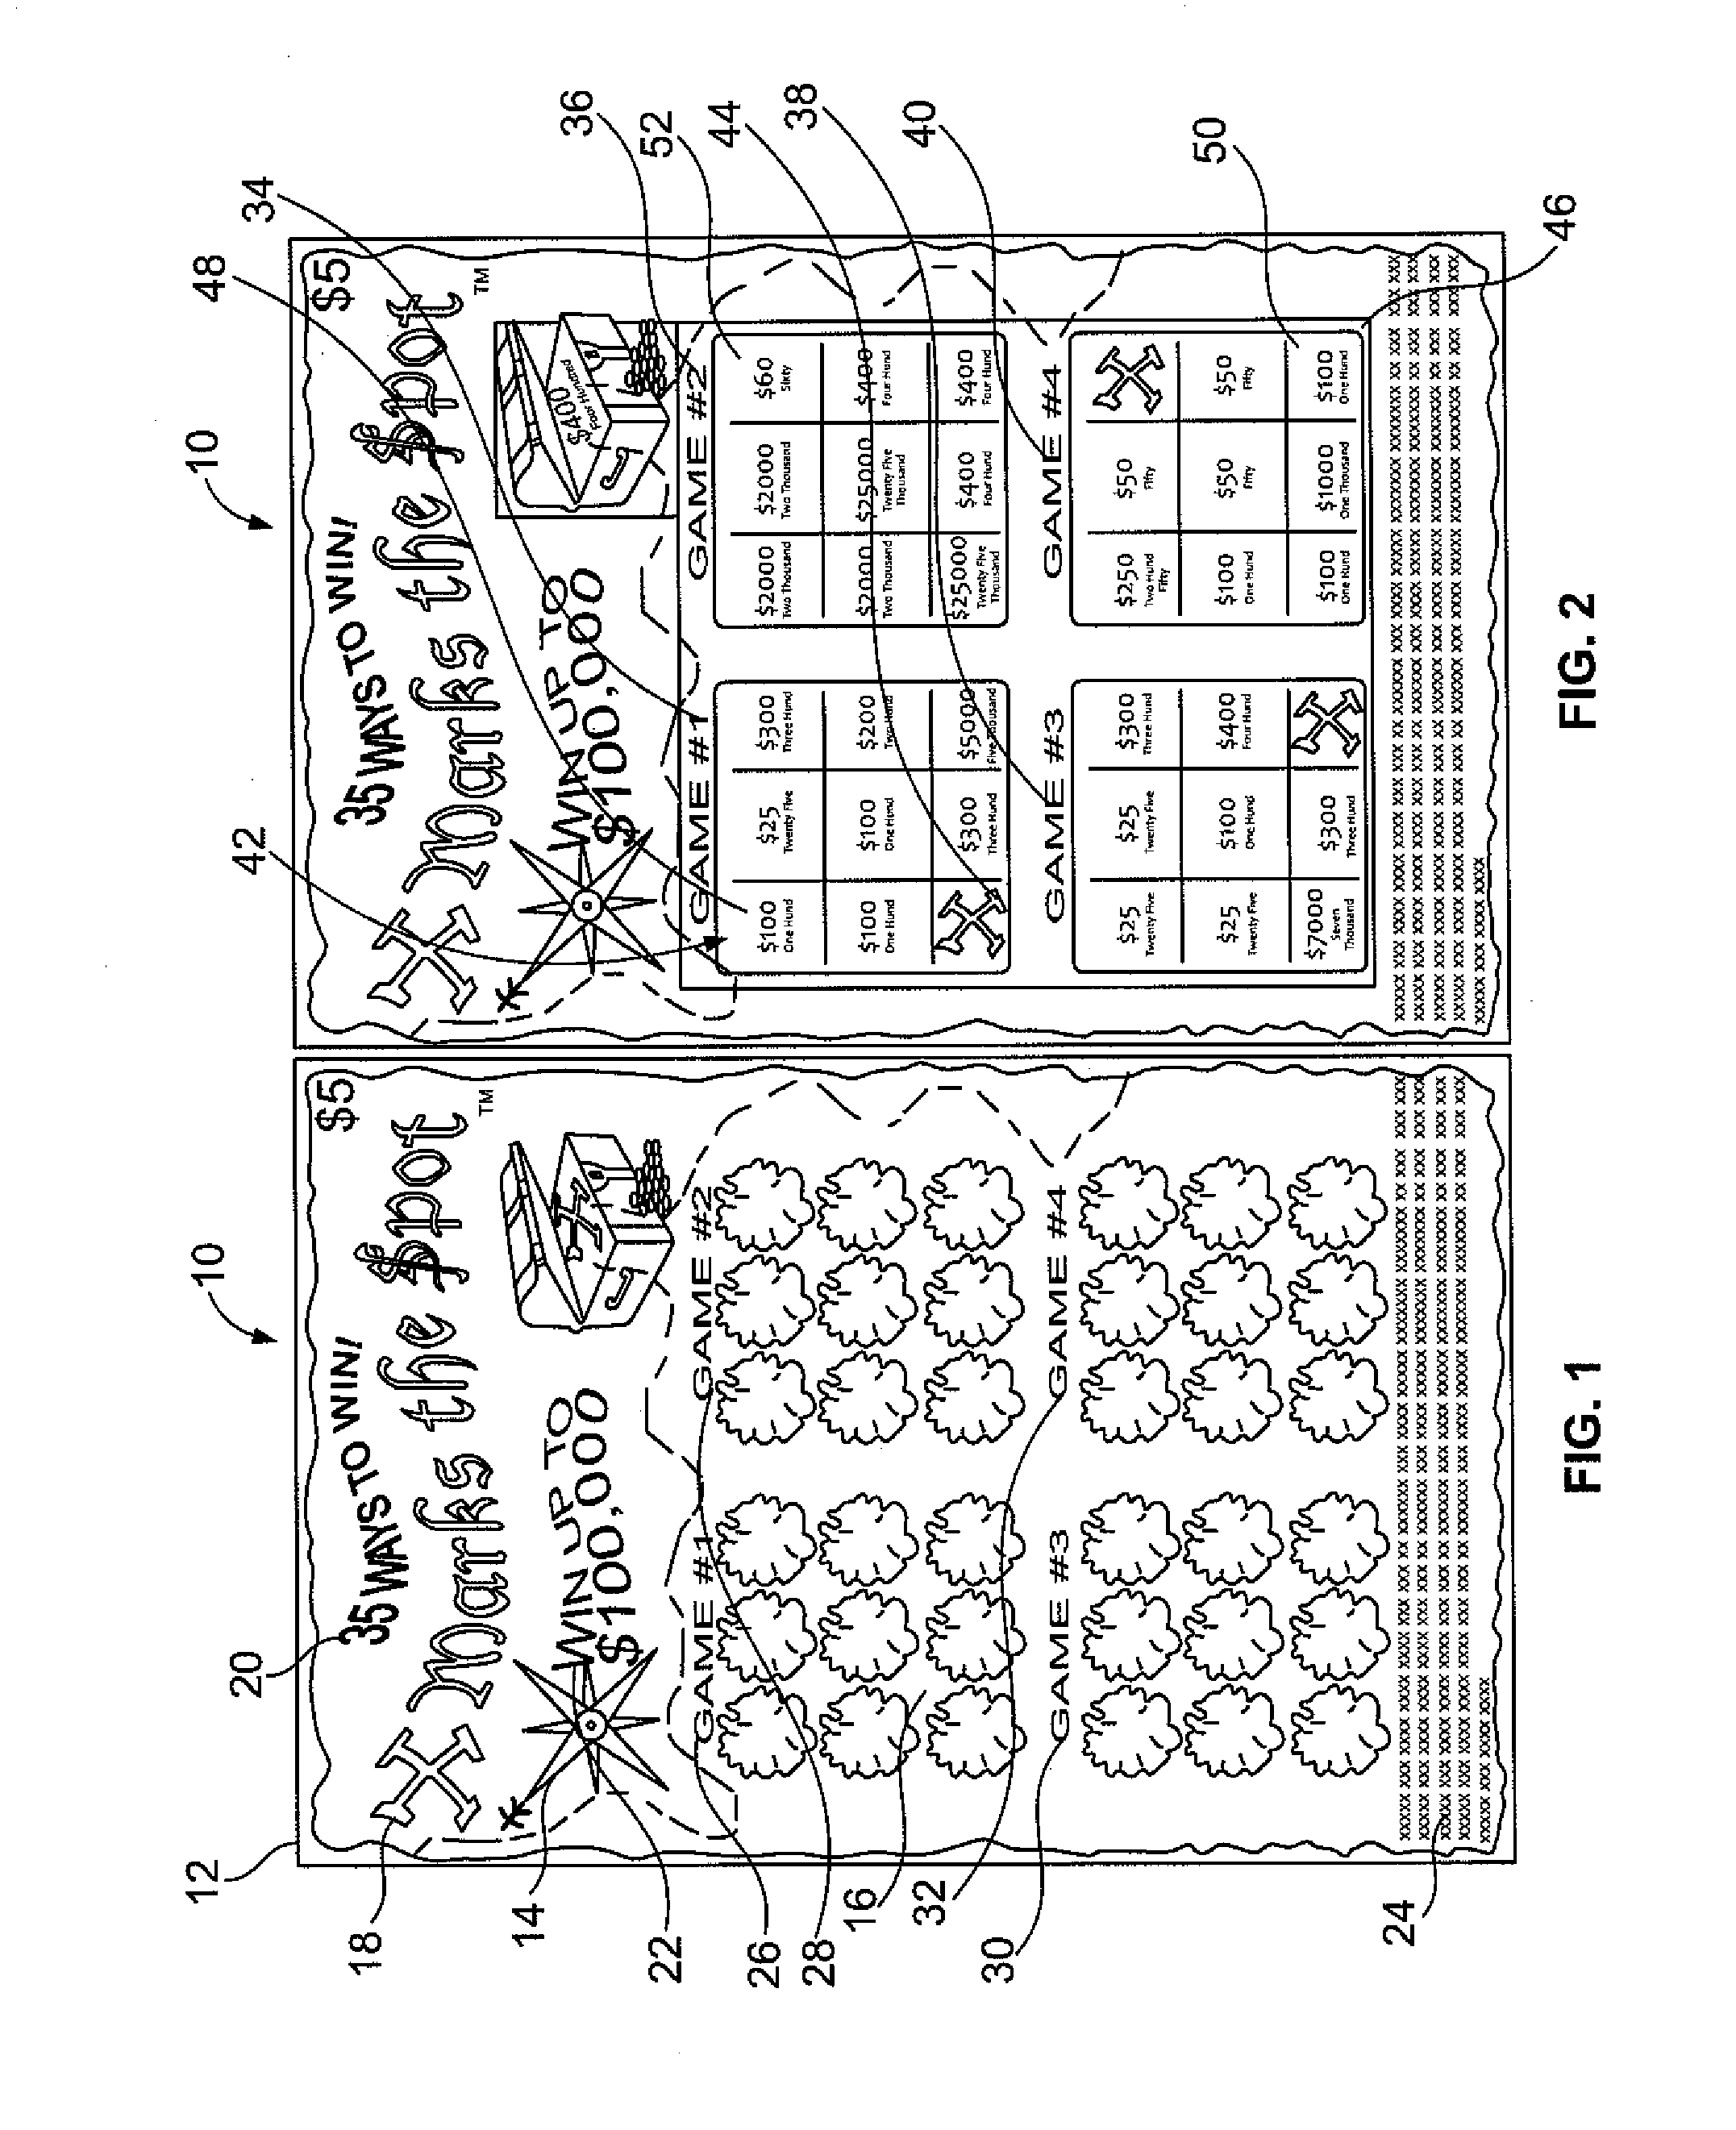 Lottery ticket apparatus containing multiple game play areas and methods thereof